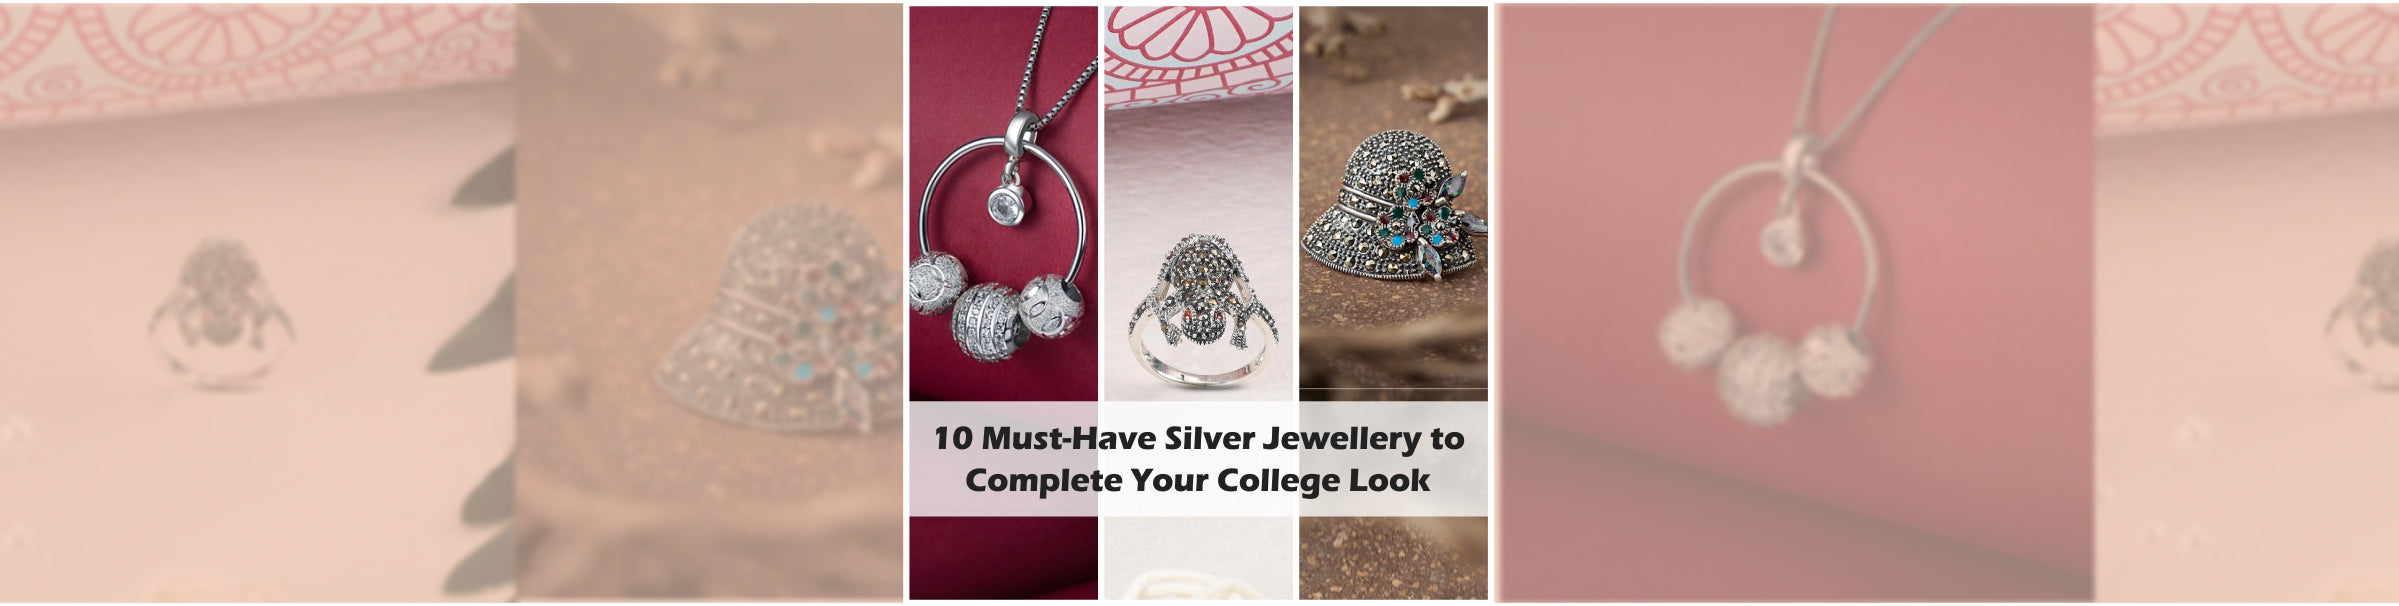 10 Must-Have Silver Jewellery to Complete Your College Look